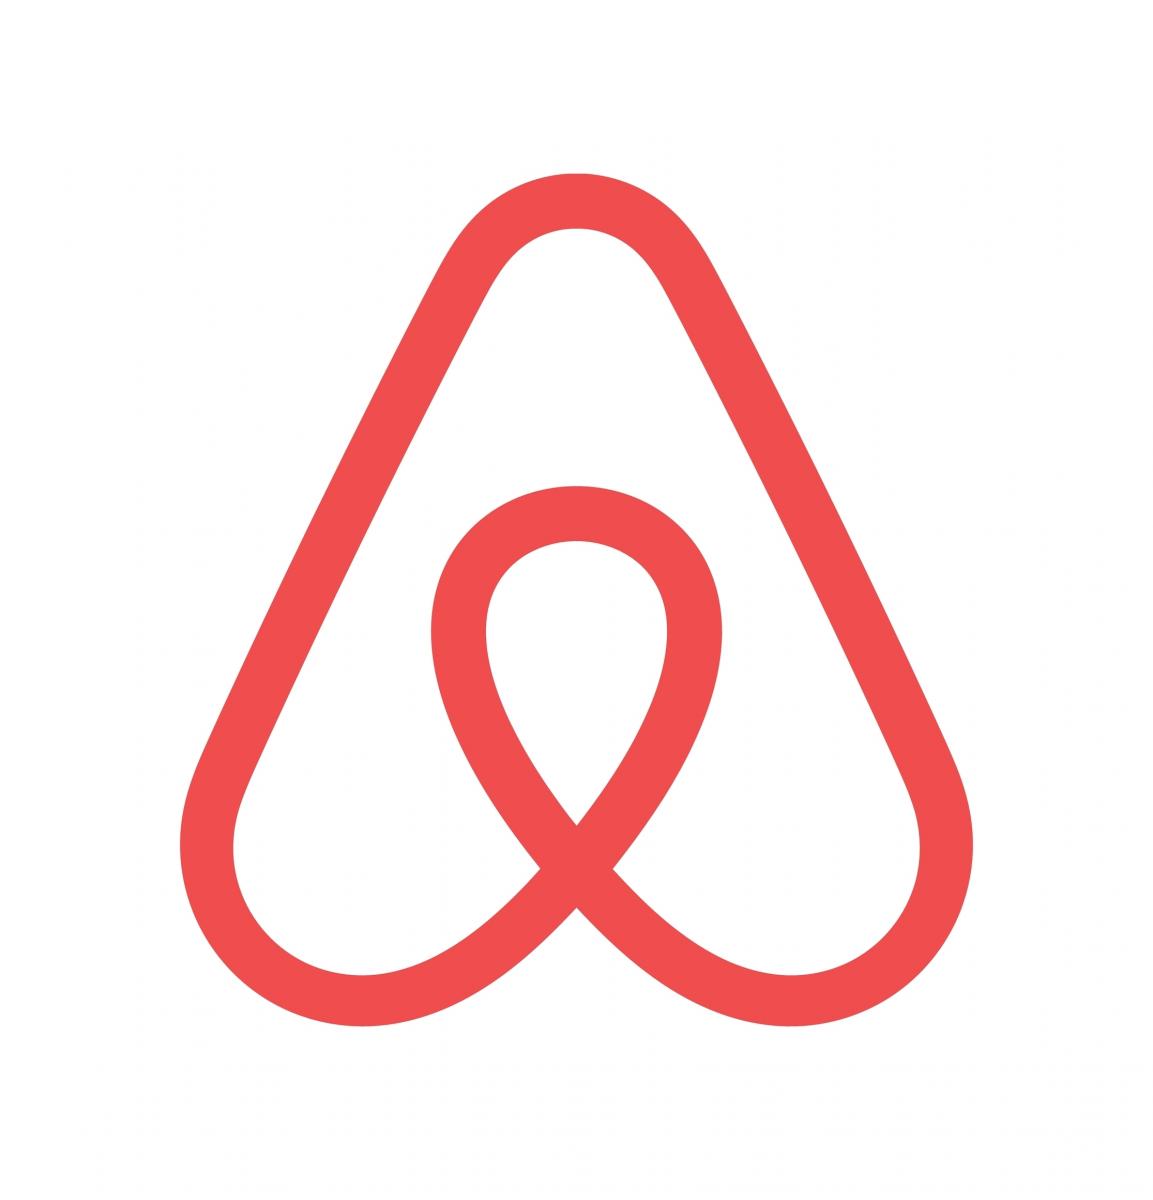 Airbnb-Friendly Mortgages - campaign underway for more lenders